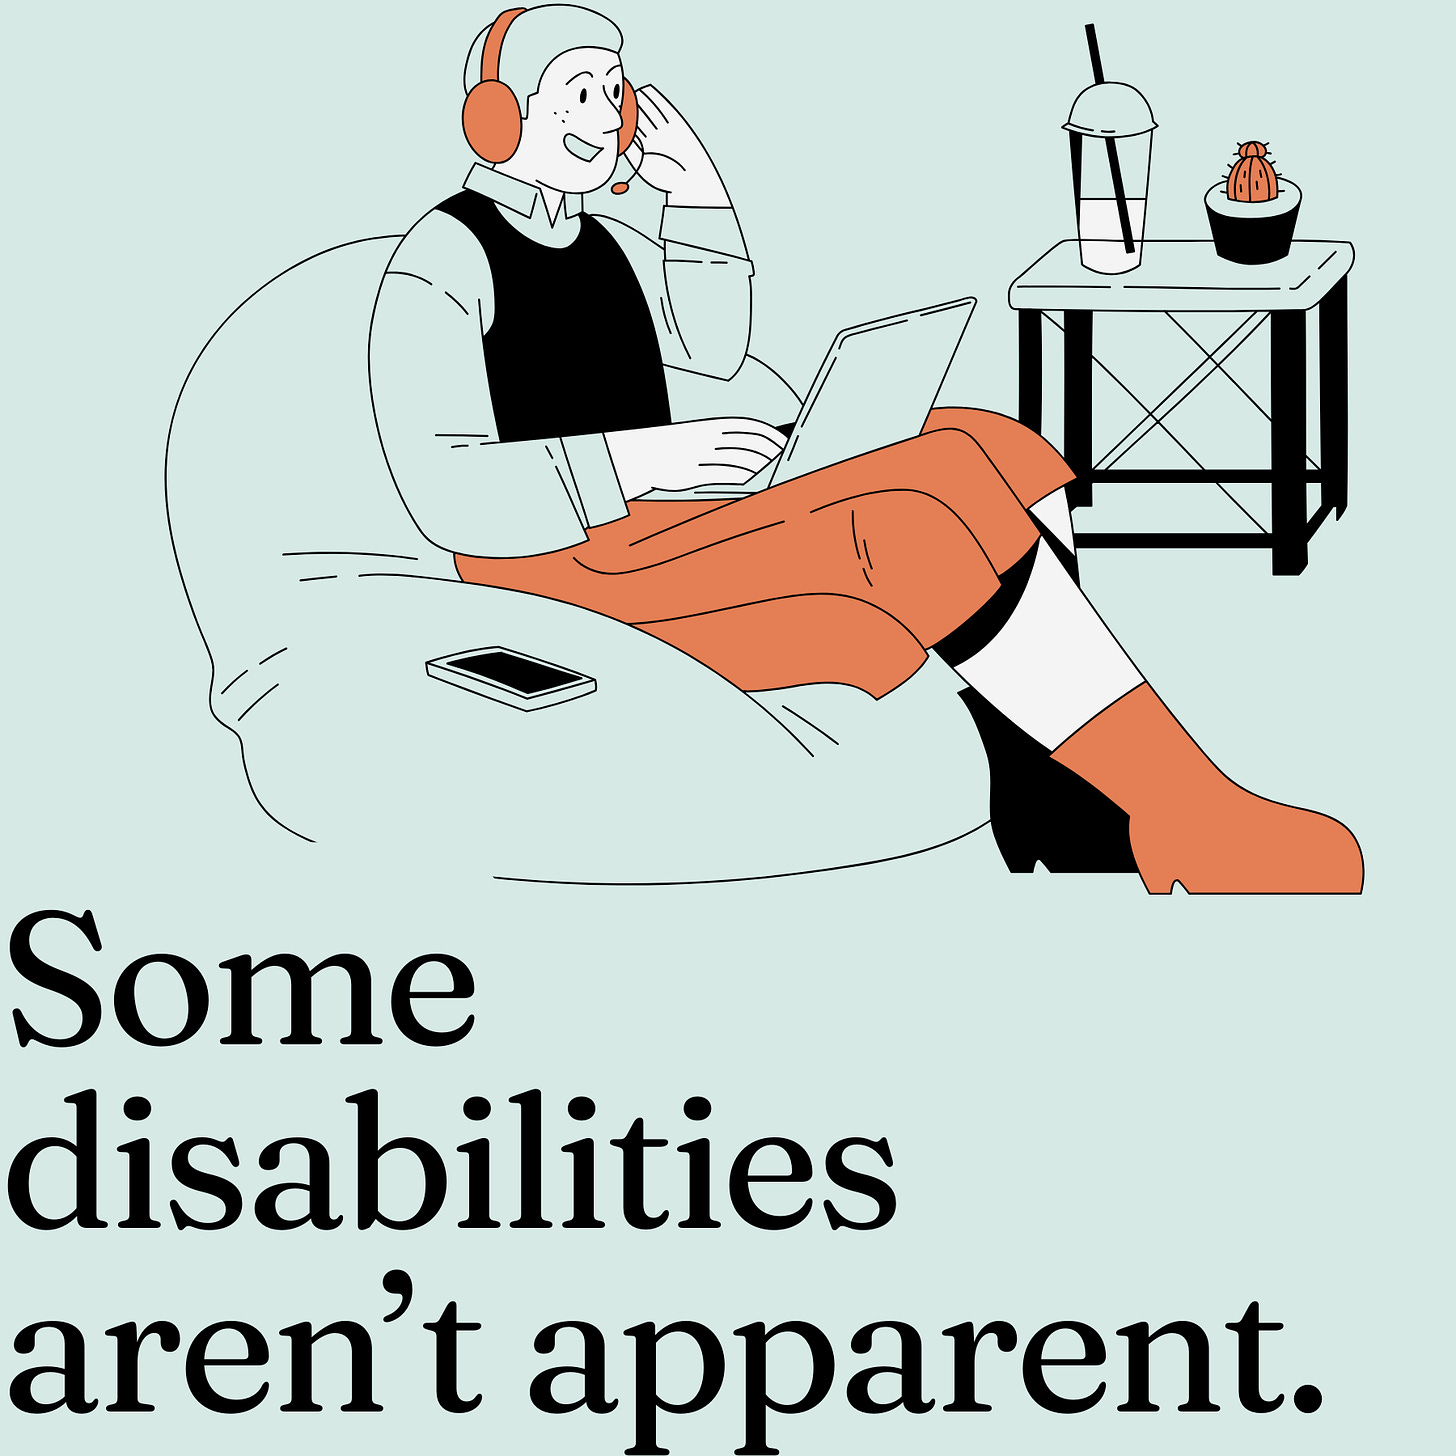 An illustration of a person sitting in a beanbag chair working on a laptop with headphones on. Next to them is a stool with a drink and plant on it. Text below them reads "Some disabilities aren't apparent."